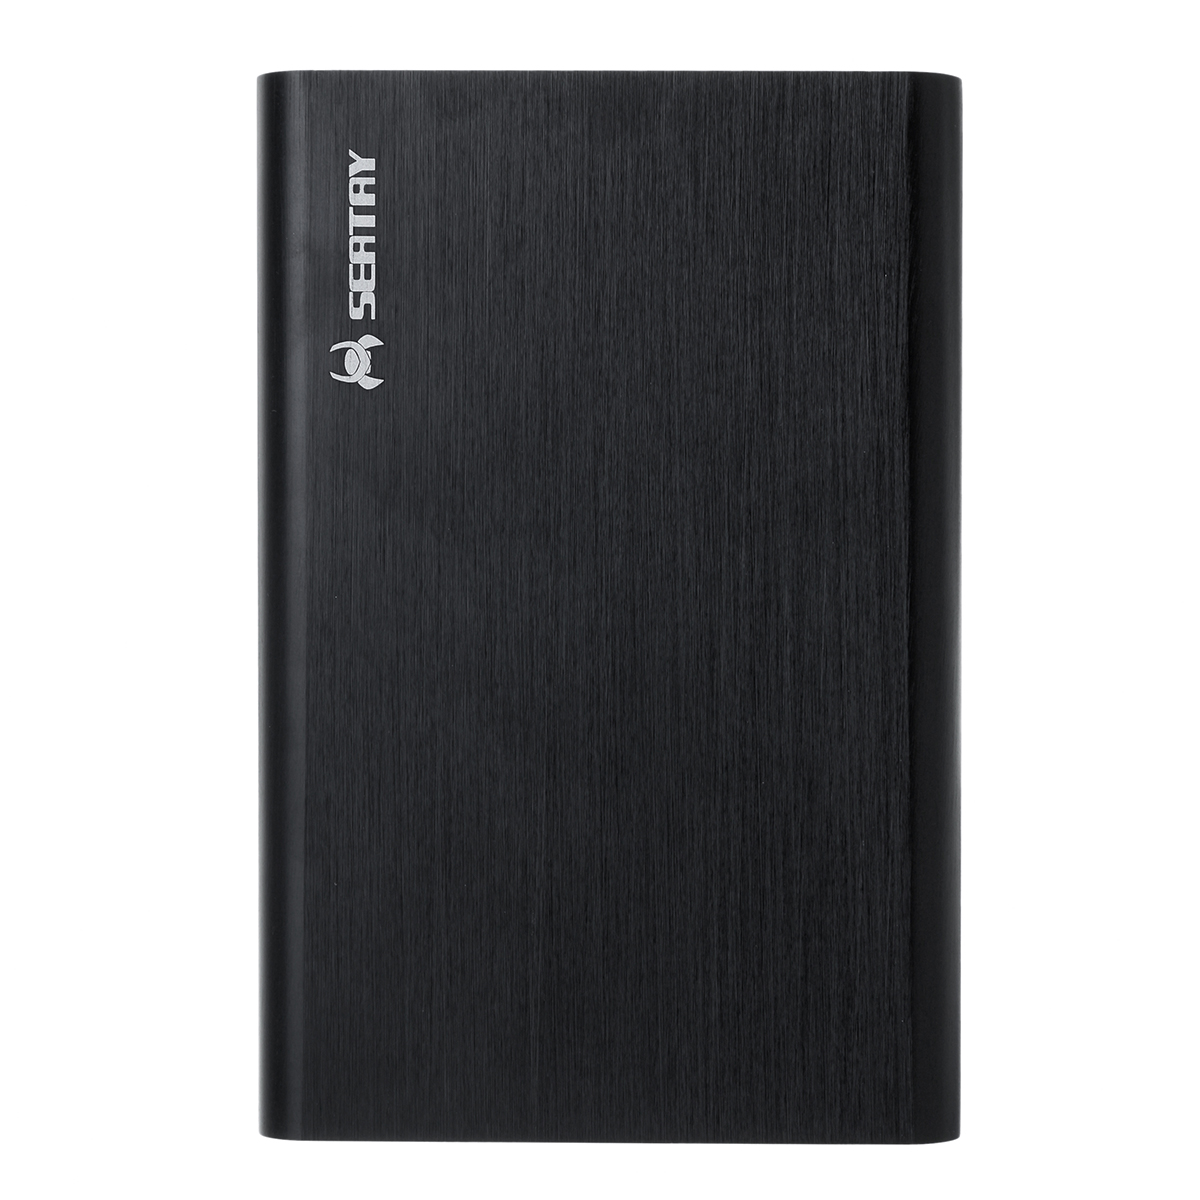 

2.5 inch SSD HDD Enclosure SATA to USB 3.0 Solid State Drive Case Hard Drive Disk Enclosure for Windows